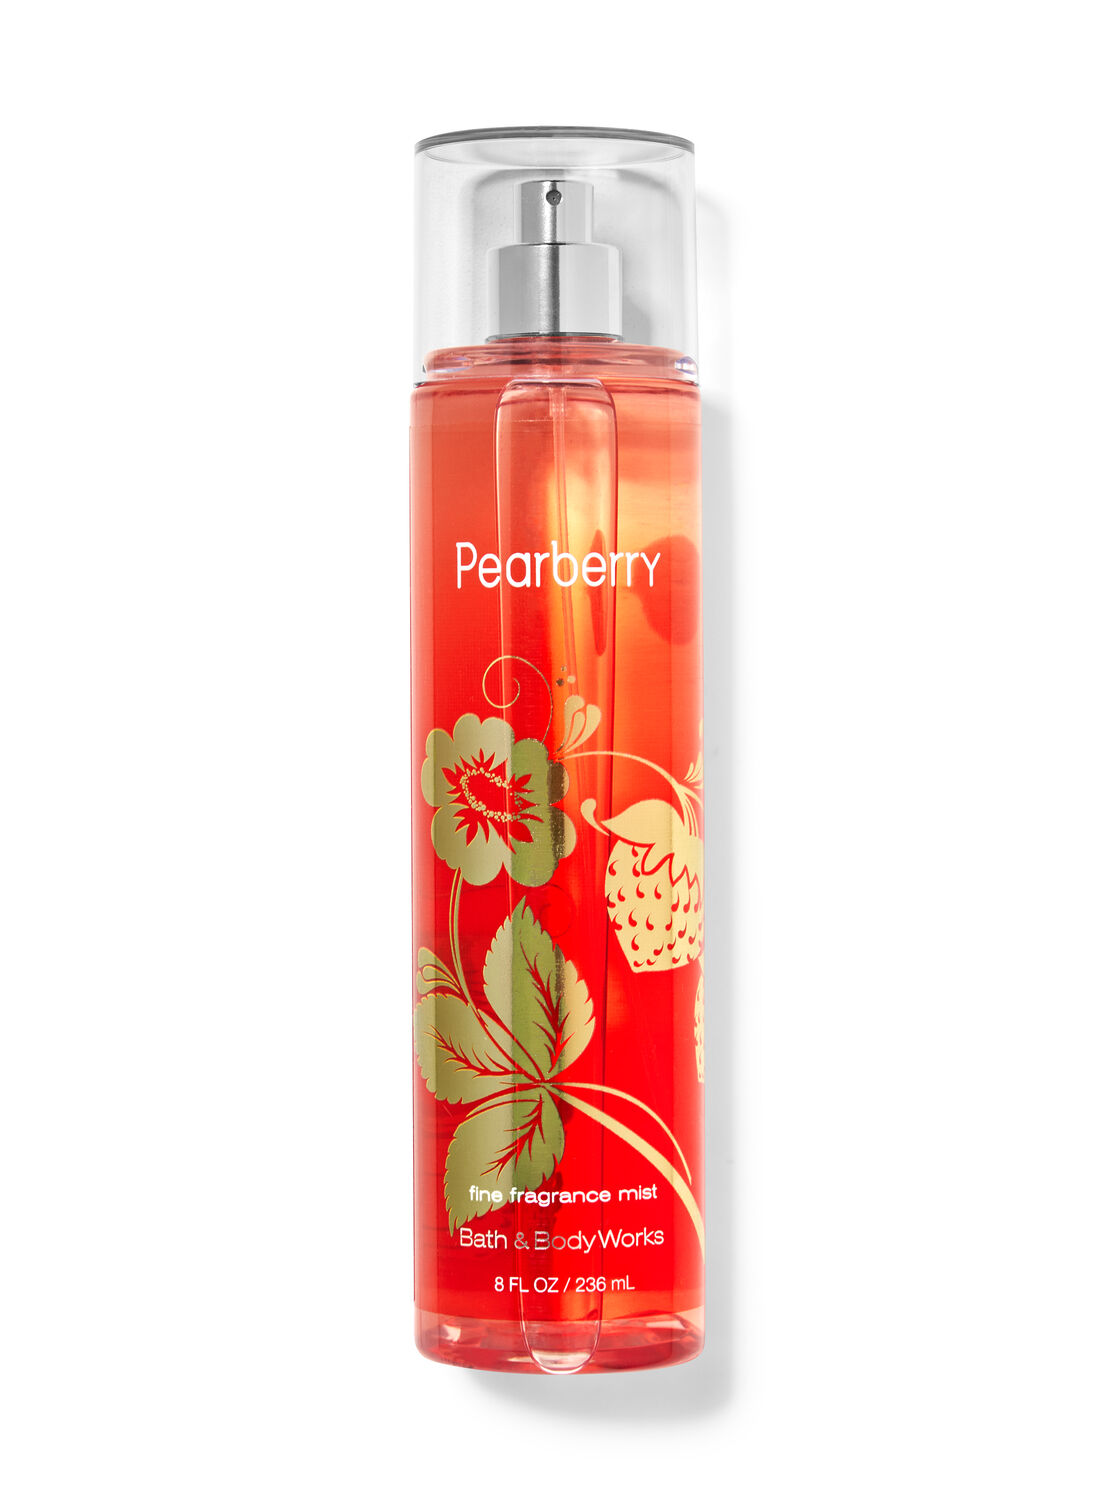 Pearberry Fine Fragrance Mist